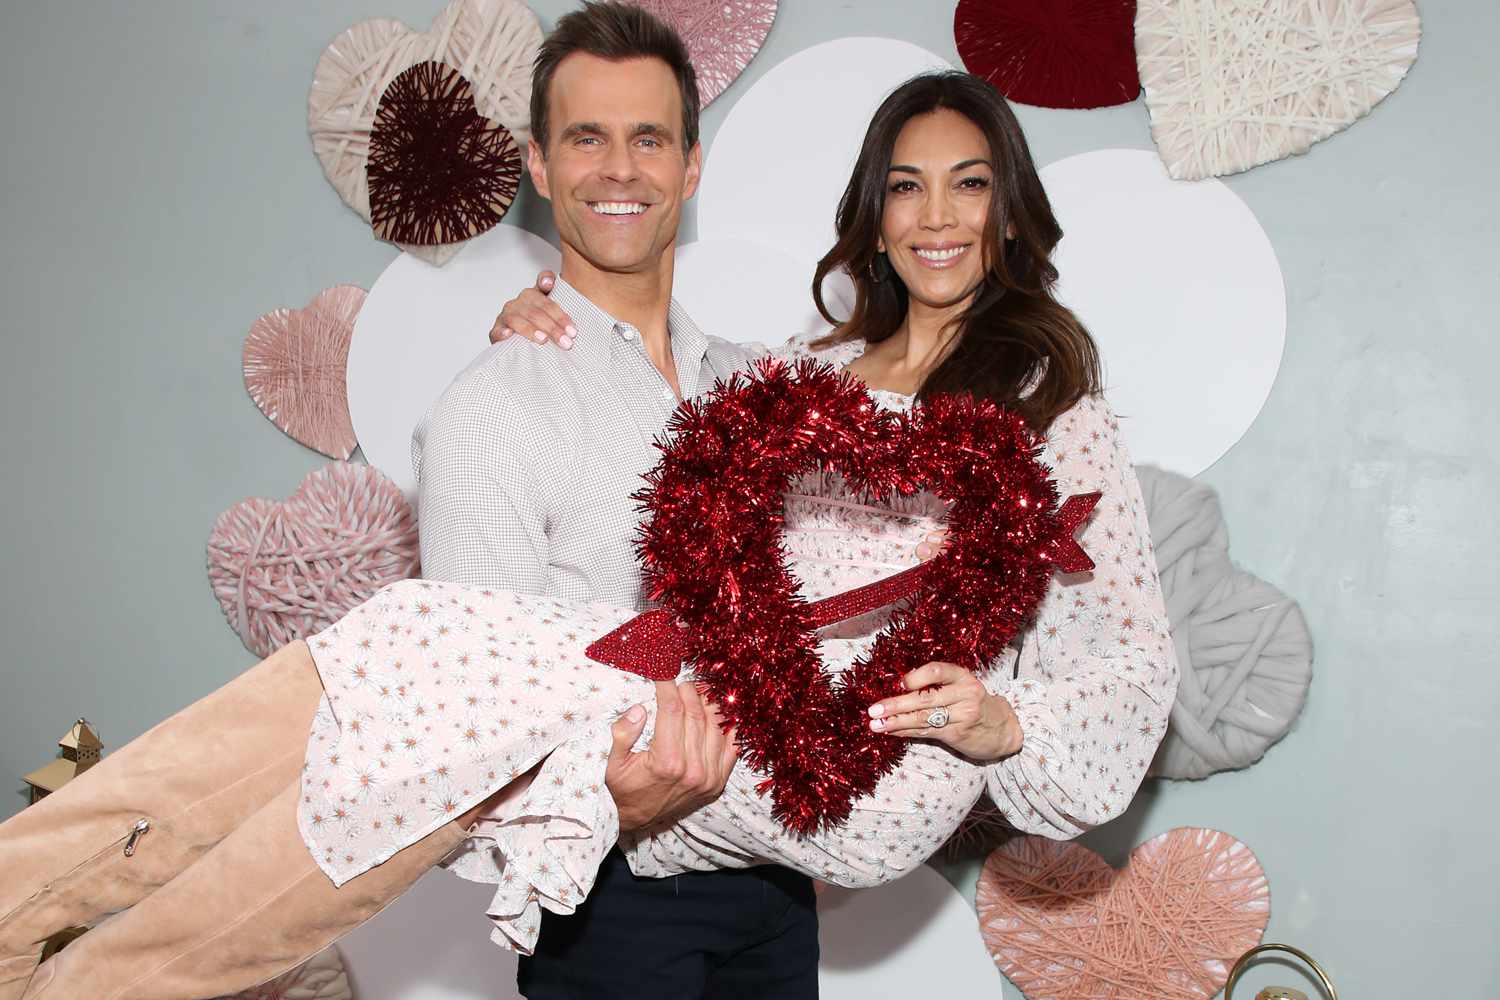 'General Hospital' star Cameron Mathison and wife Vanessa divorcing after 22 years